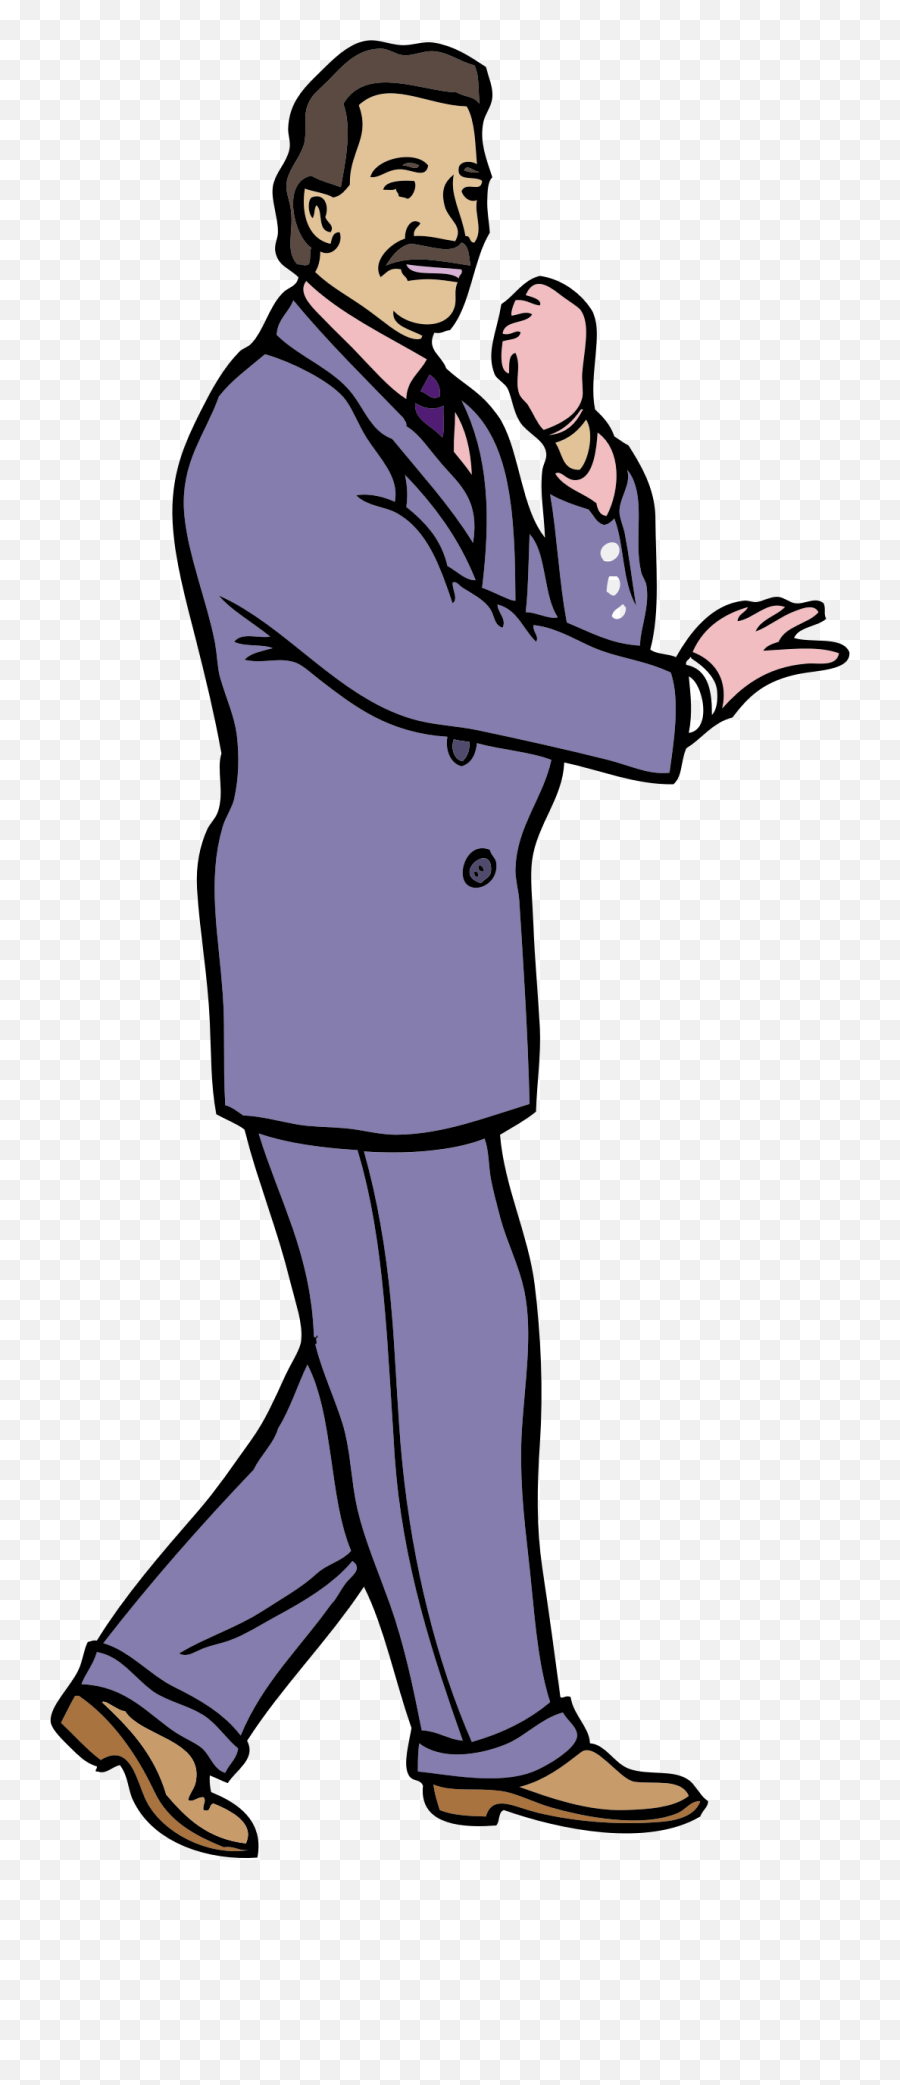 Free Clipart Karate Guy In A Fashionable Purple Suit W - Suited Man Clip Art Emoji,Suit Clipart